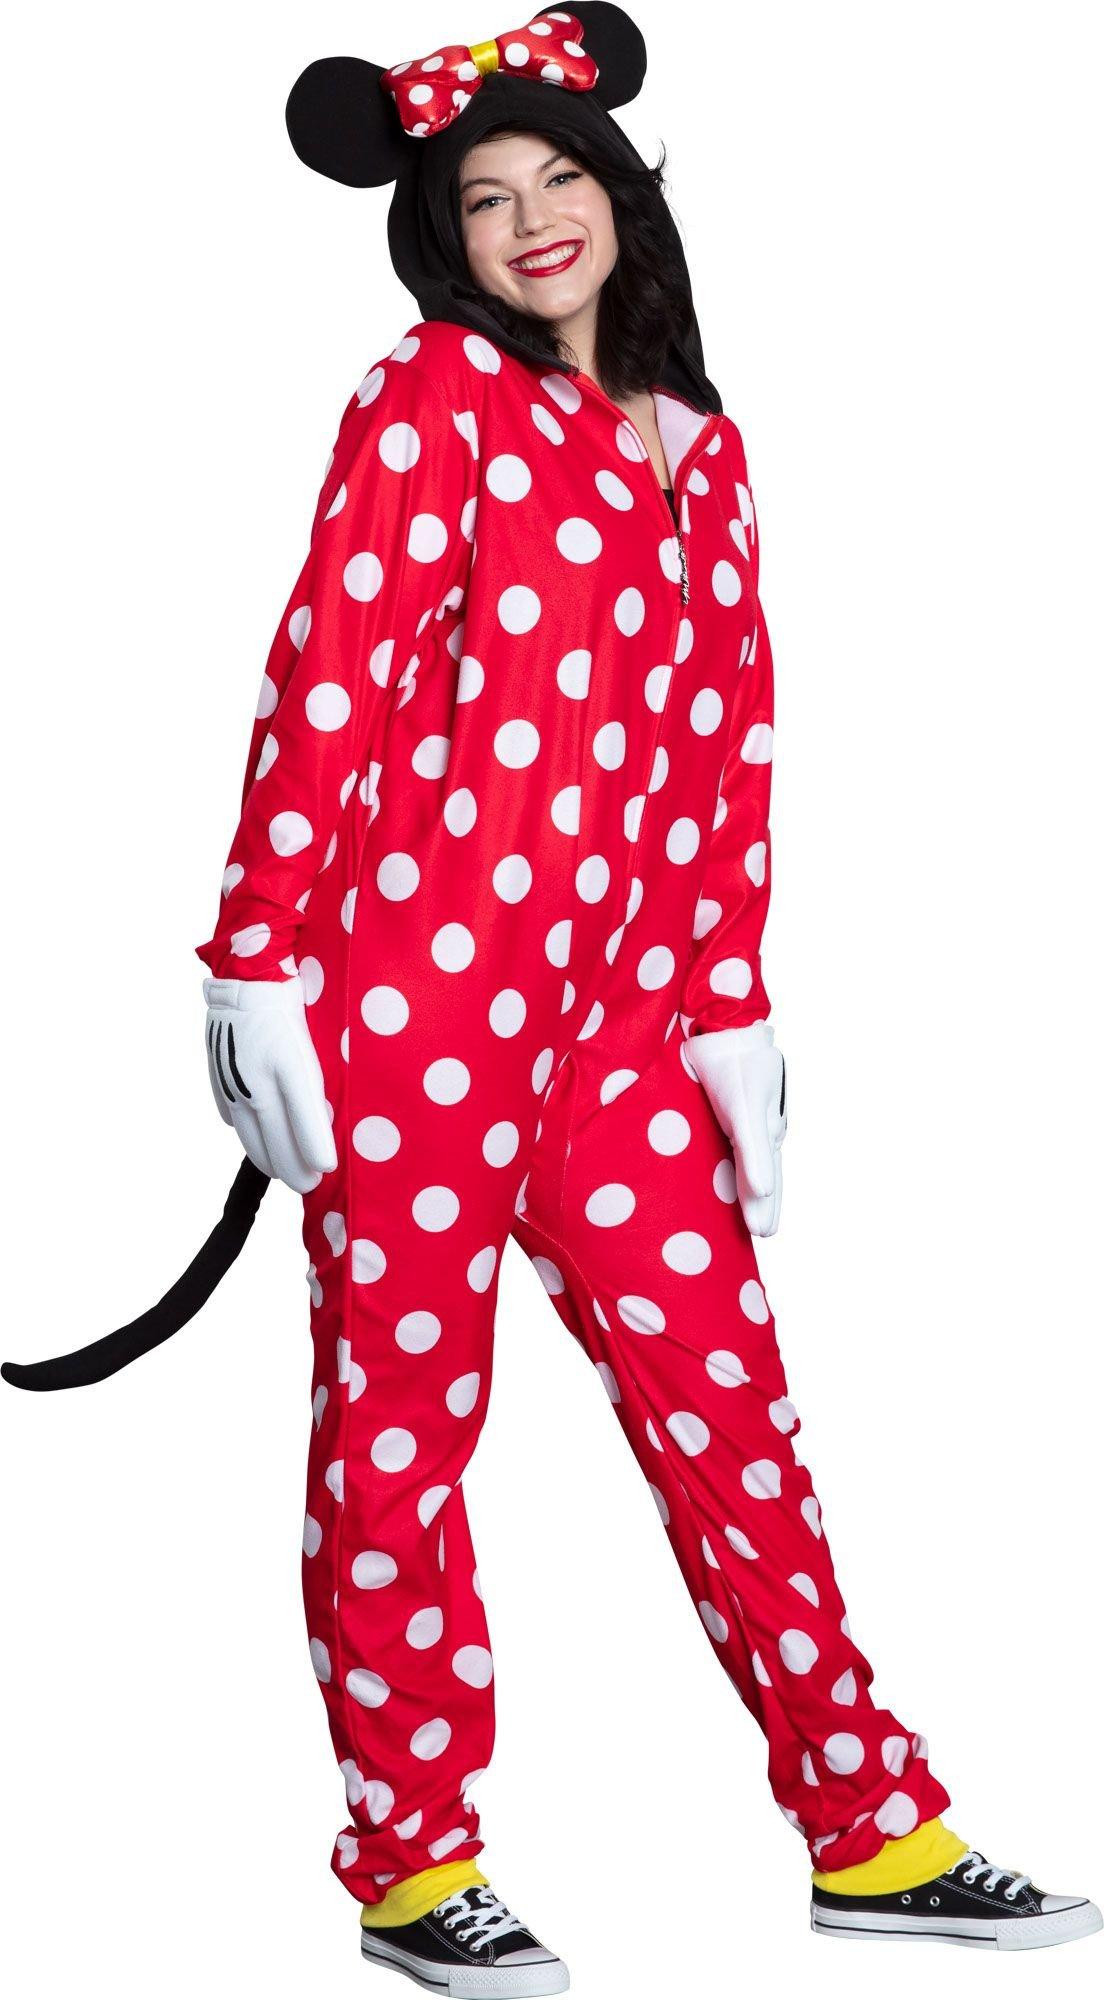 Adult Zipster Red Polka Dot Minnie Mouse One Piece Costume - Disney